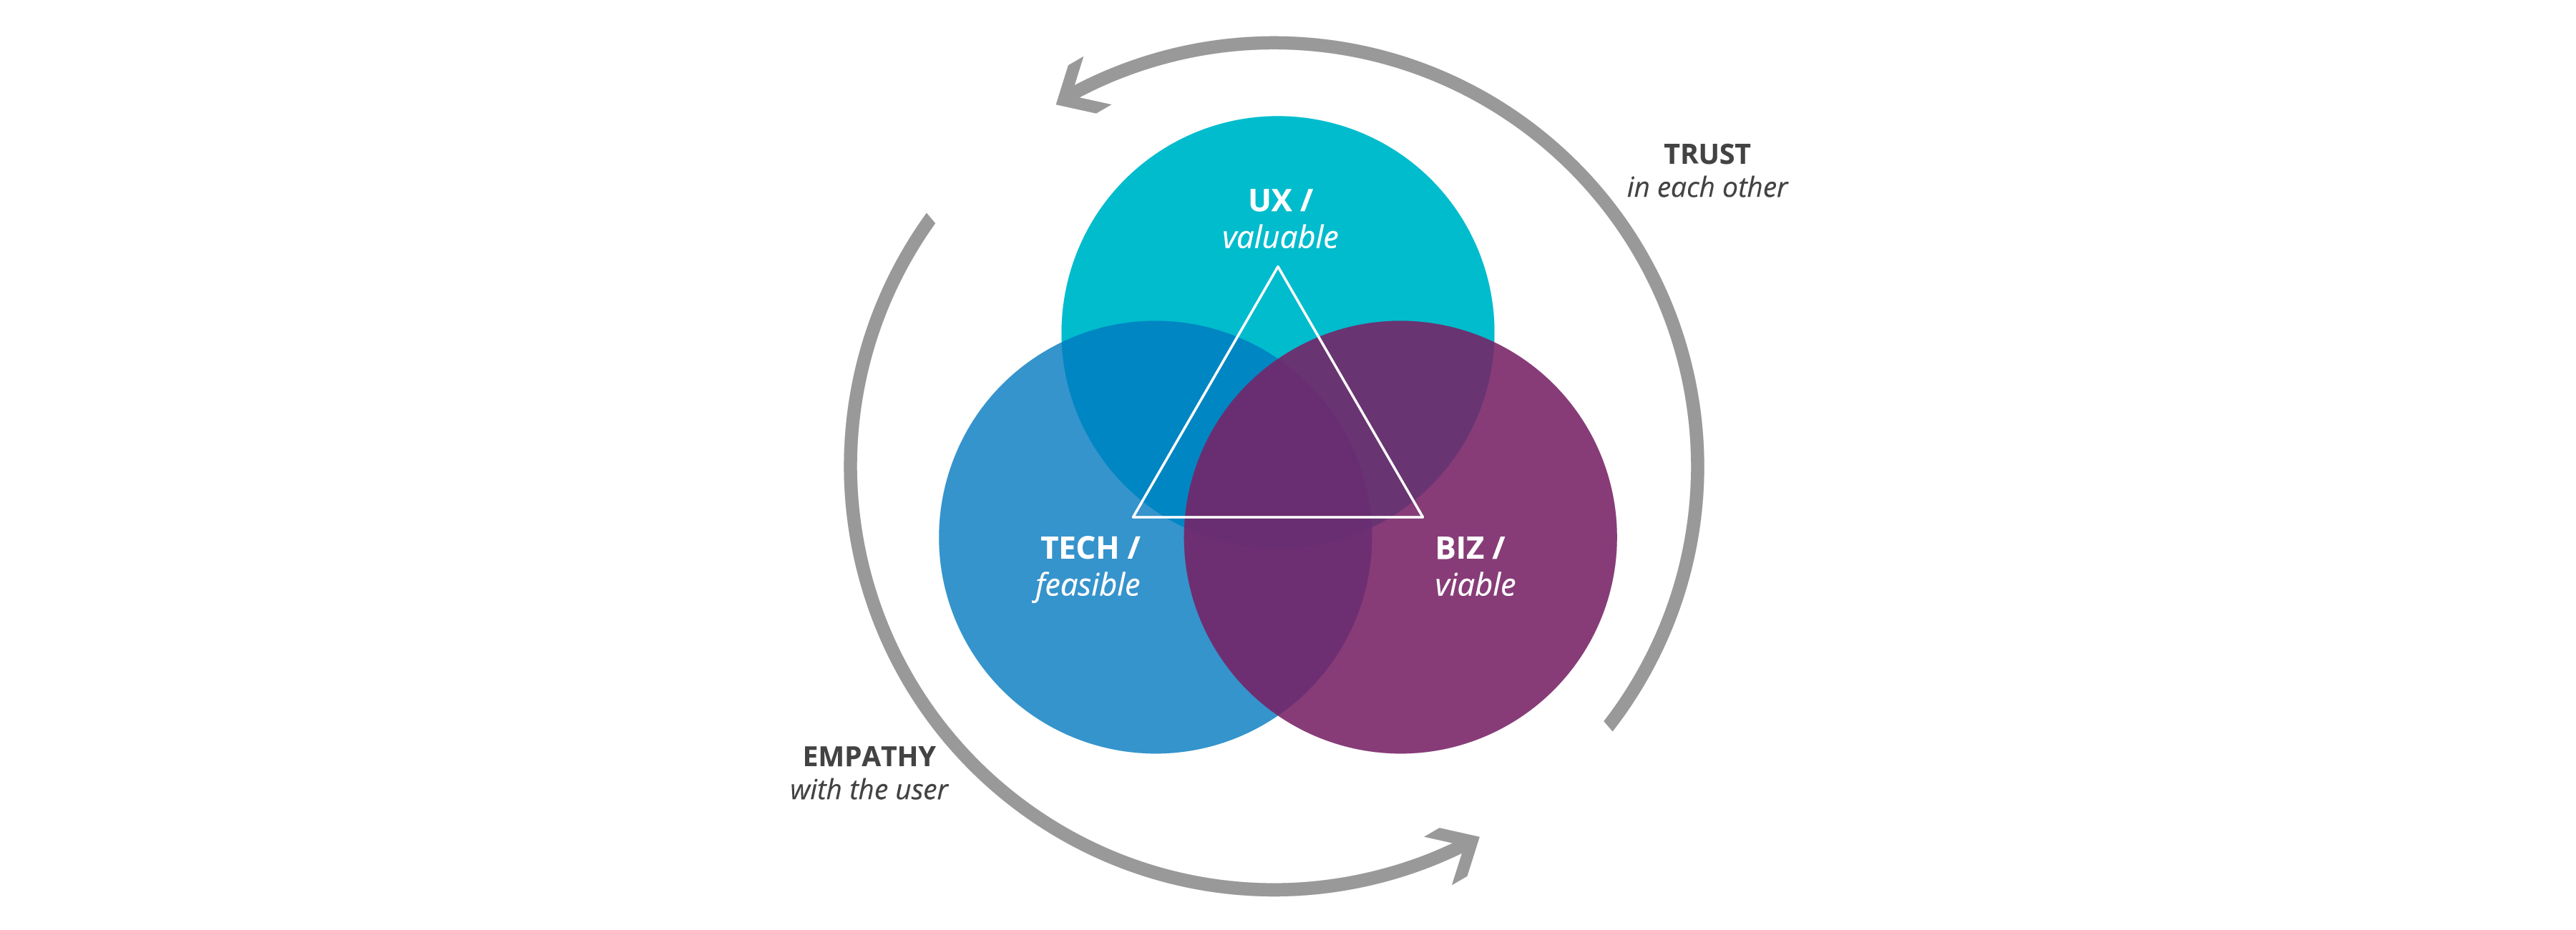 The Three Lenses of Innovation: A three circle Venn diagram contains UX (valuable), Biz (viable), Tech (feasible) in equal amounts, connected by a triangle. On the outside are two circular arrows running counter clockwise to indicate the movement of empathy with the user and trust in each other.